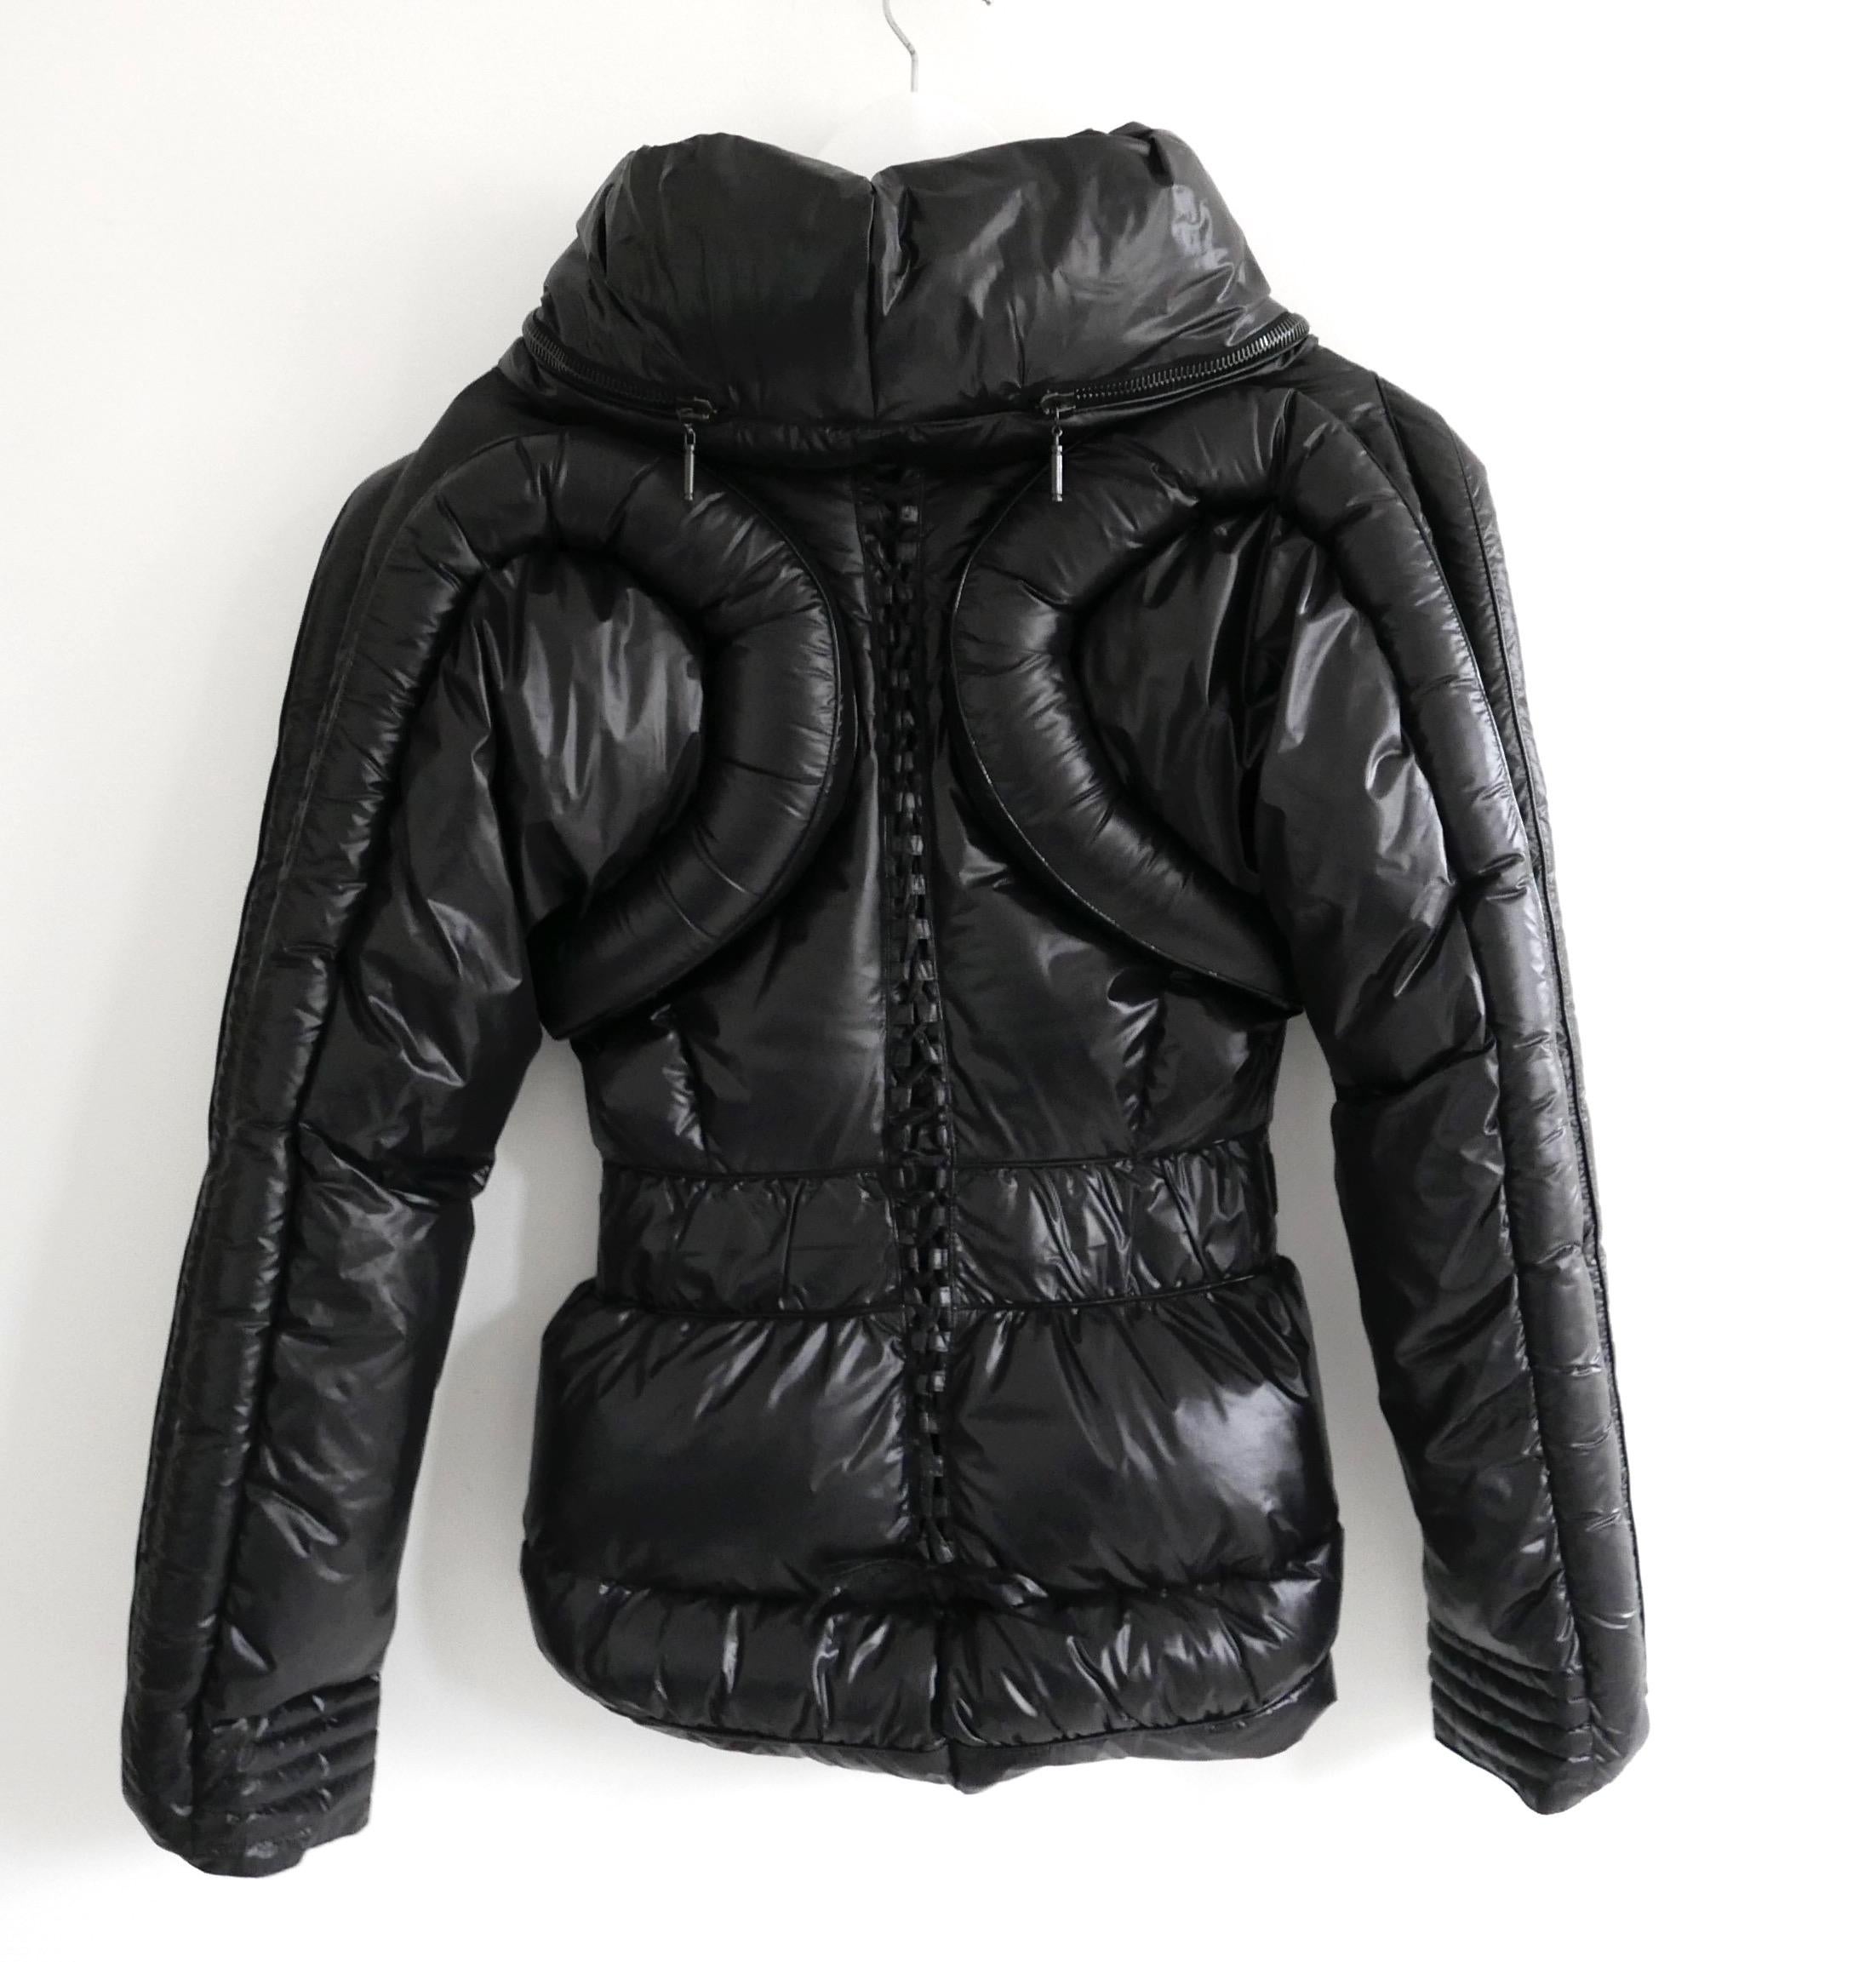 Absolutely incredible vintage Emanuel Ungaro puffer coat. From the Fall 2007 collection (look 11) and in immaculate, unworn condition. Made from soft, glossy black nylon with masses of chunky, black enamelled hardware. Has a superbly sculptural